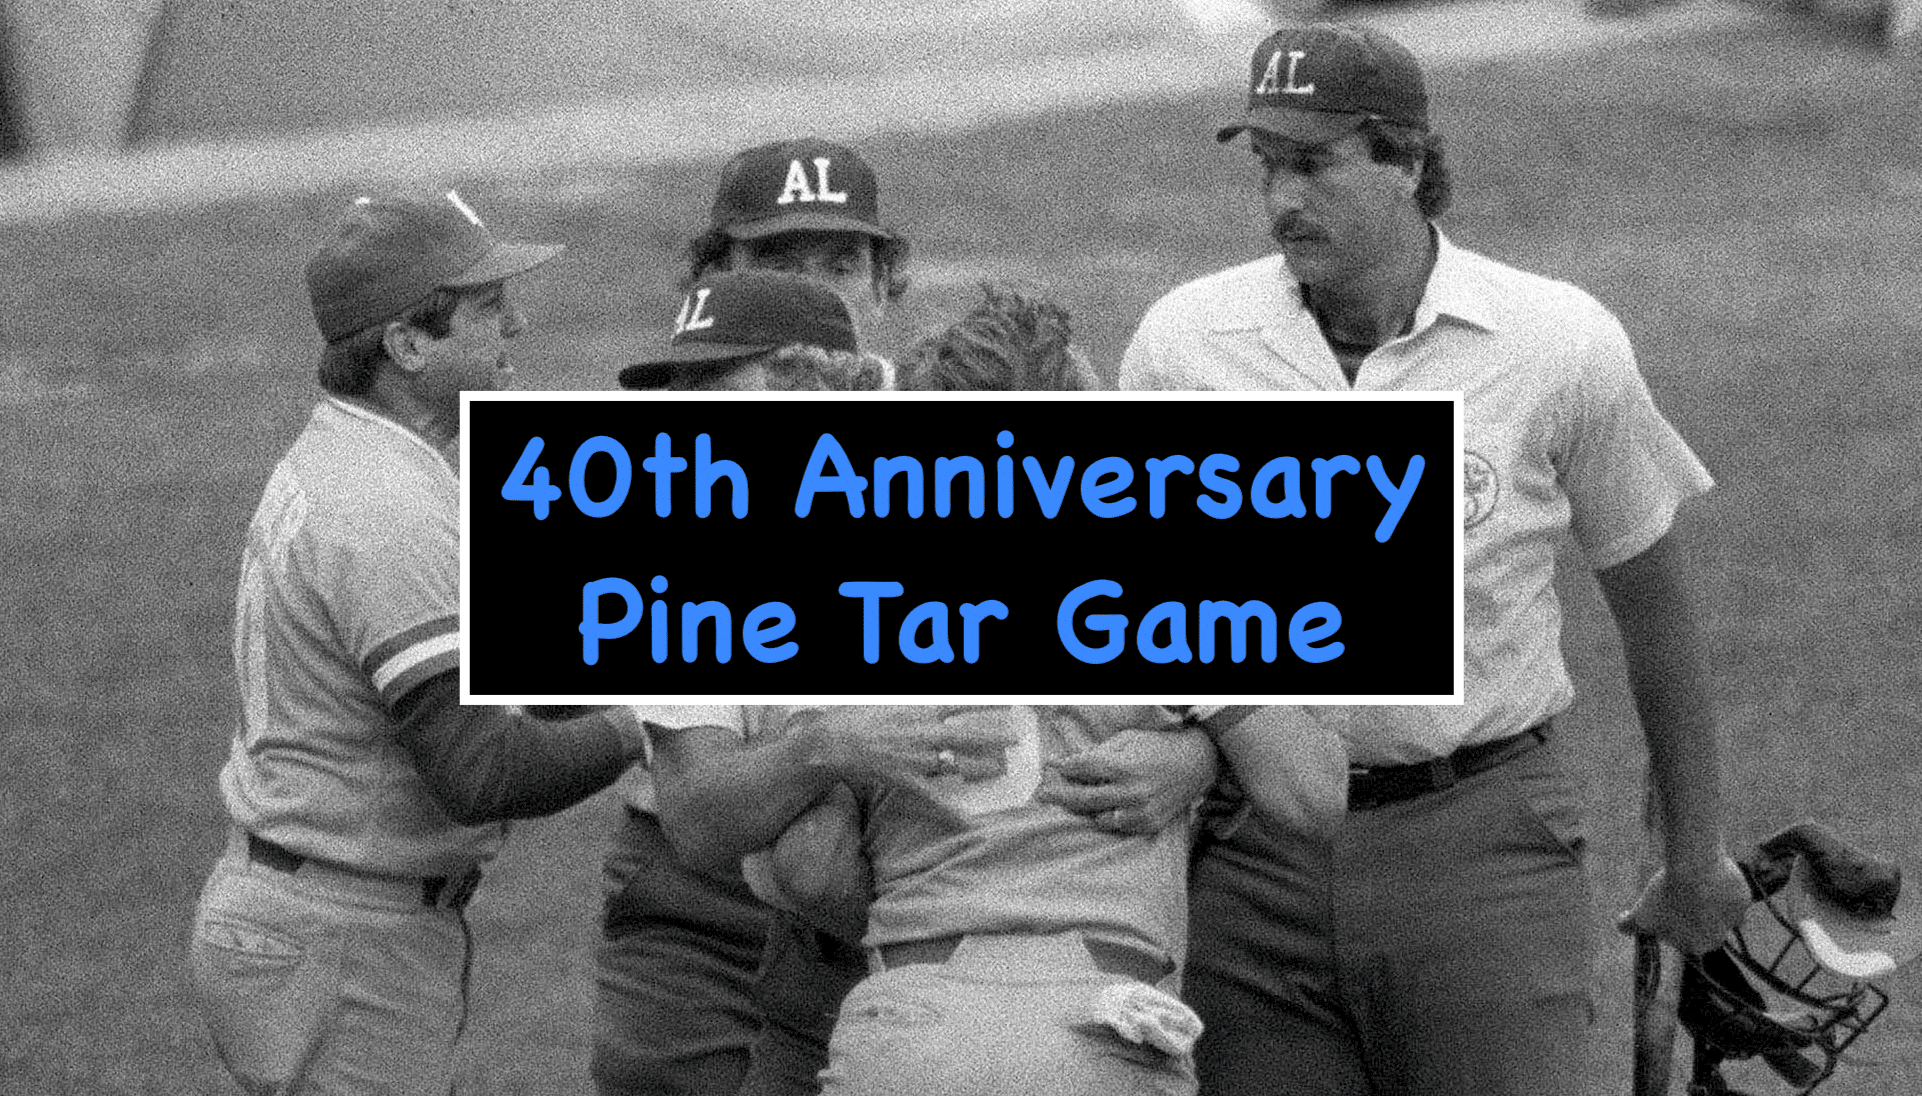 Is It Legal to Use Pine Tar for Baseball?